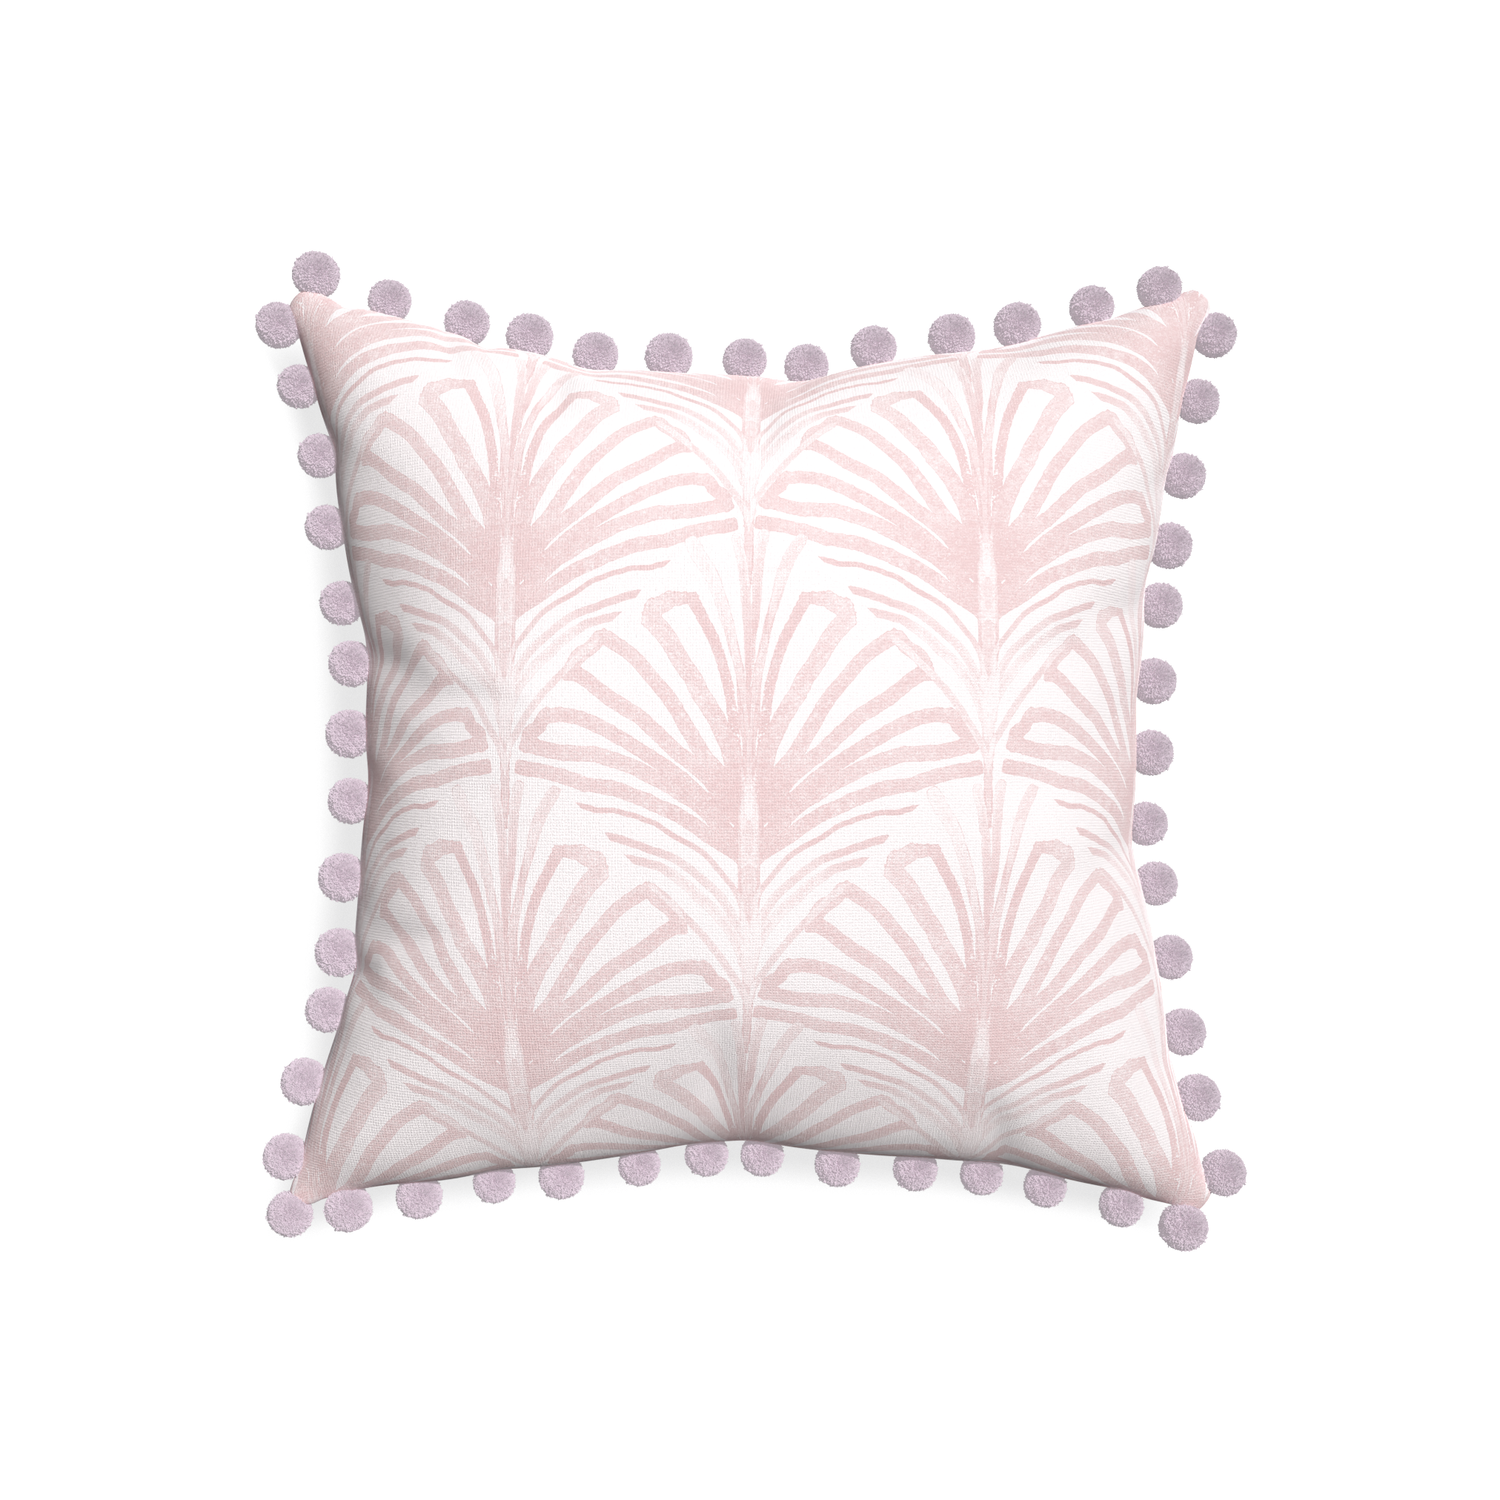 20-square suzy rose custom pillow with l on white background